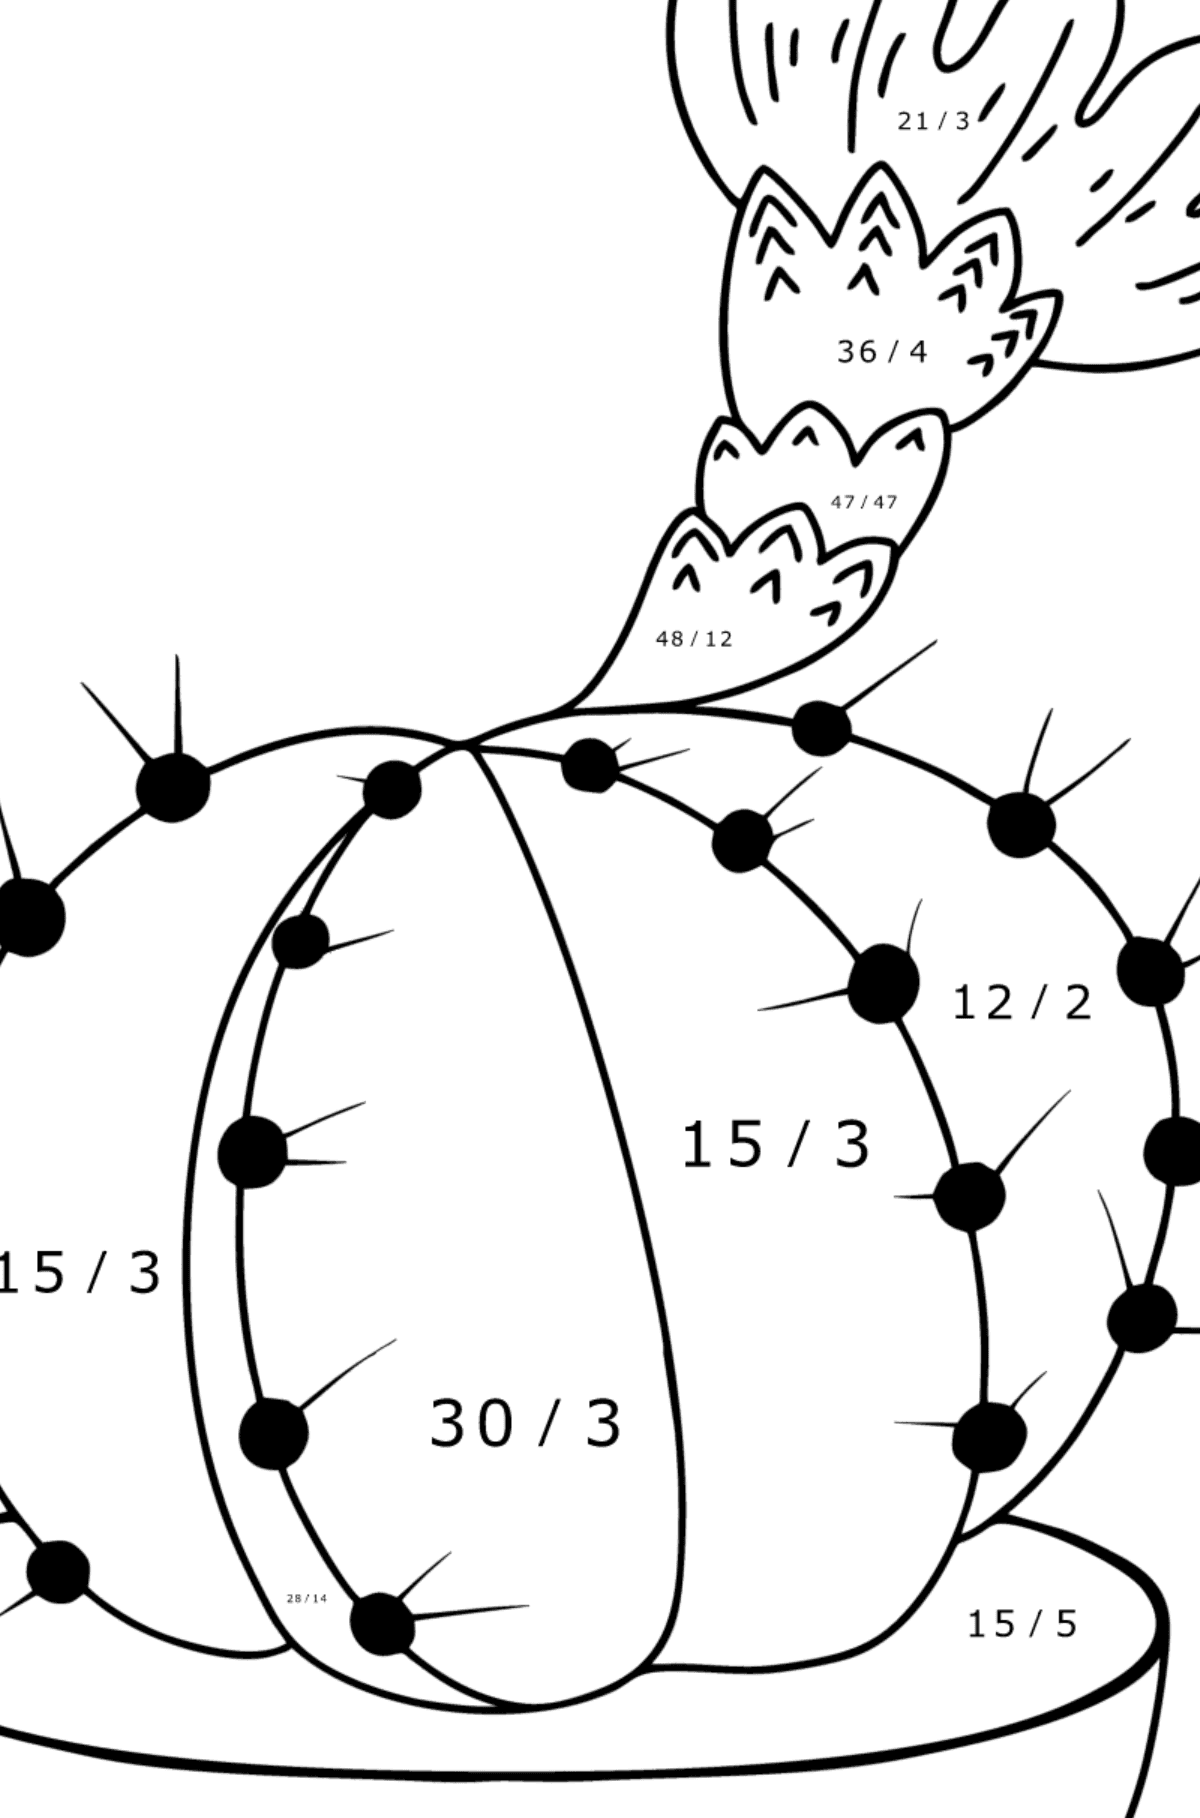 Cute cactus coloring pages - Math Coloring - Division for Kids